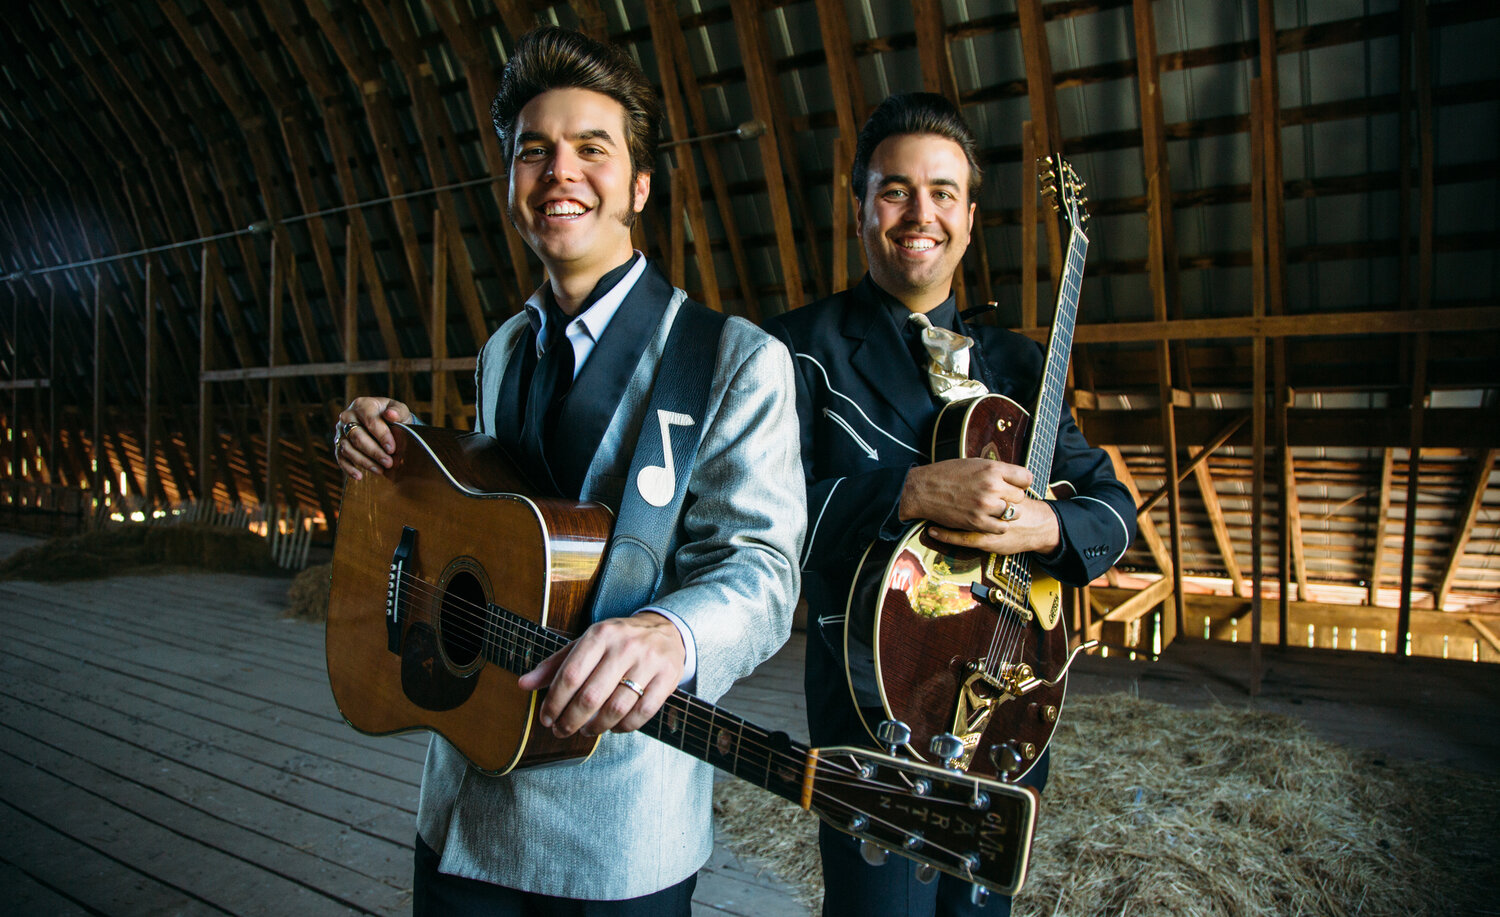 Favorites on Larry’s Country Diner and the Country’s Family Reunion TV specials, the popular  Malpass Brothers bring traditional country music to the stage.